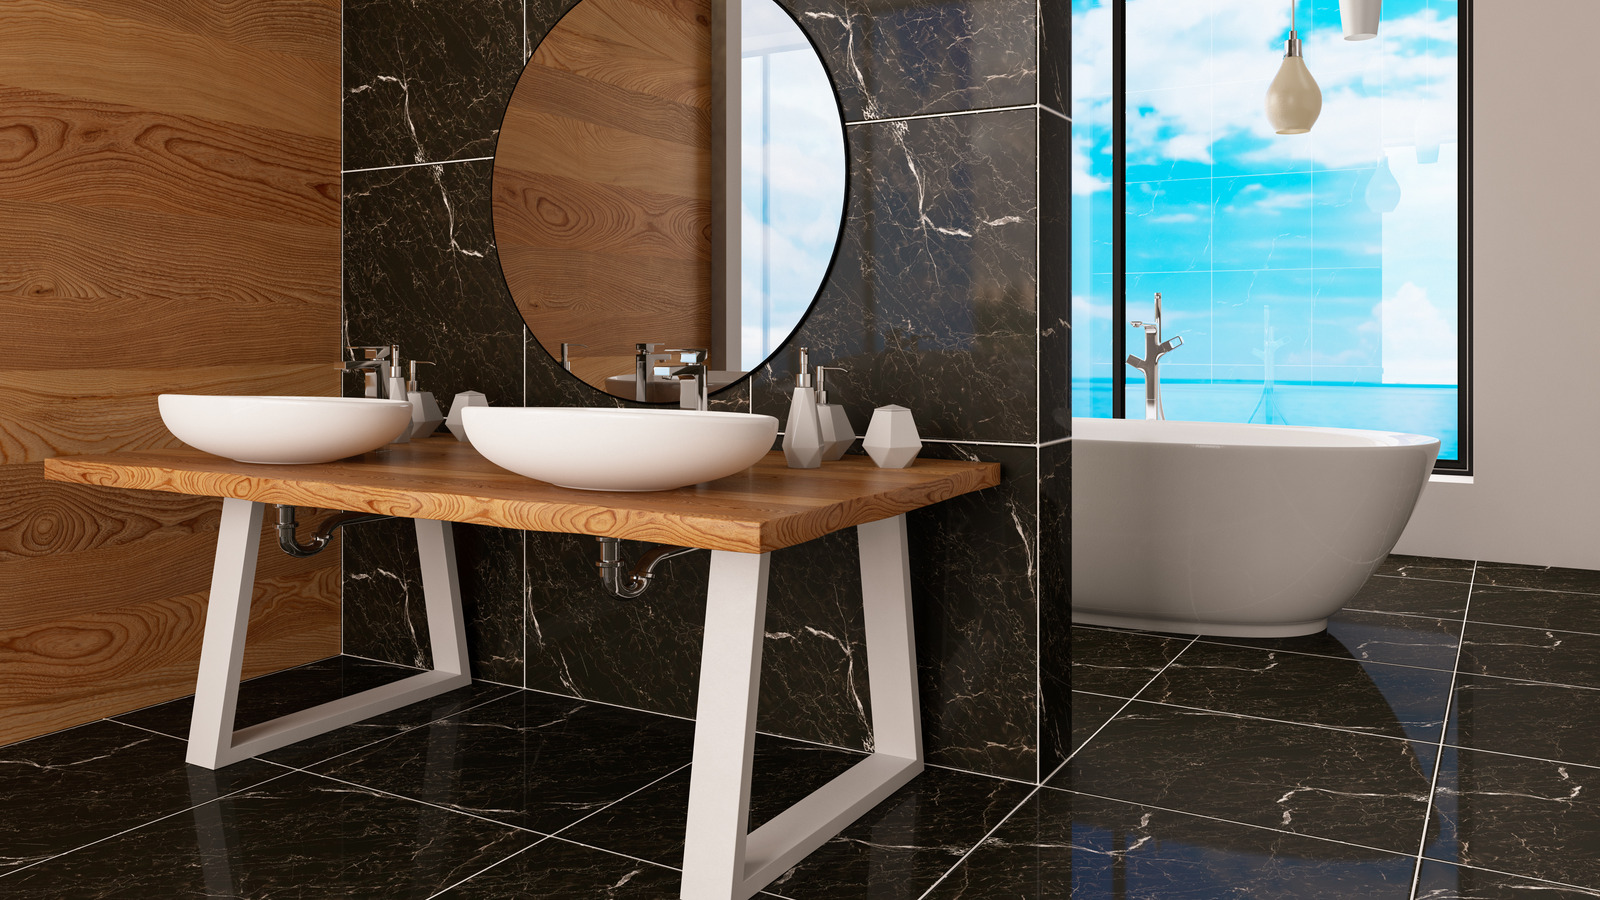 What To Consider Before Using Black Tile For Your Bathroom Floors